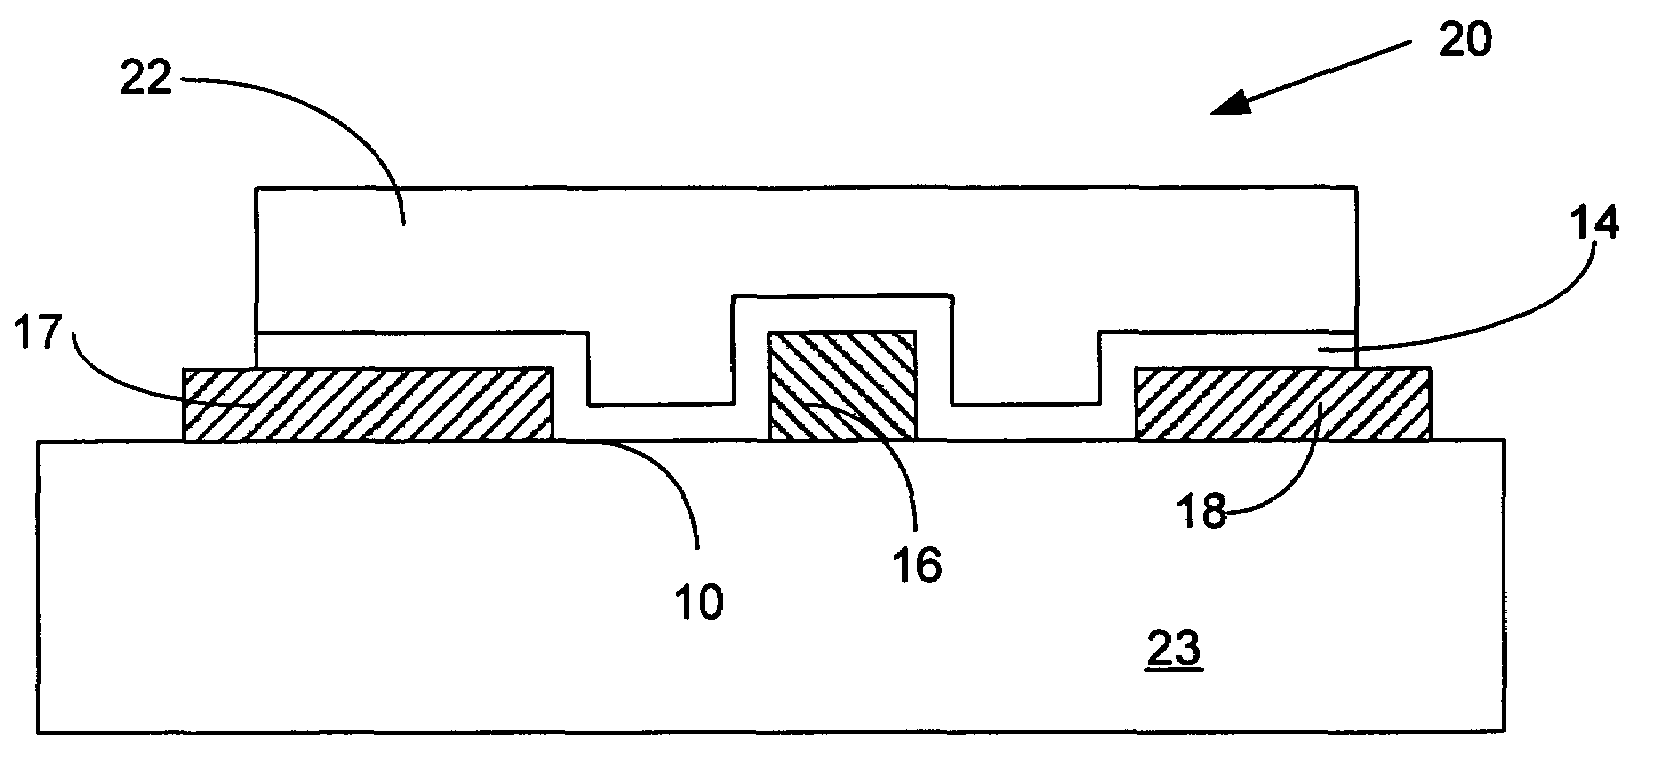 Dielectric passivation for semiconductor devices